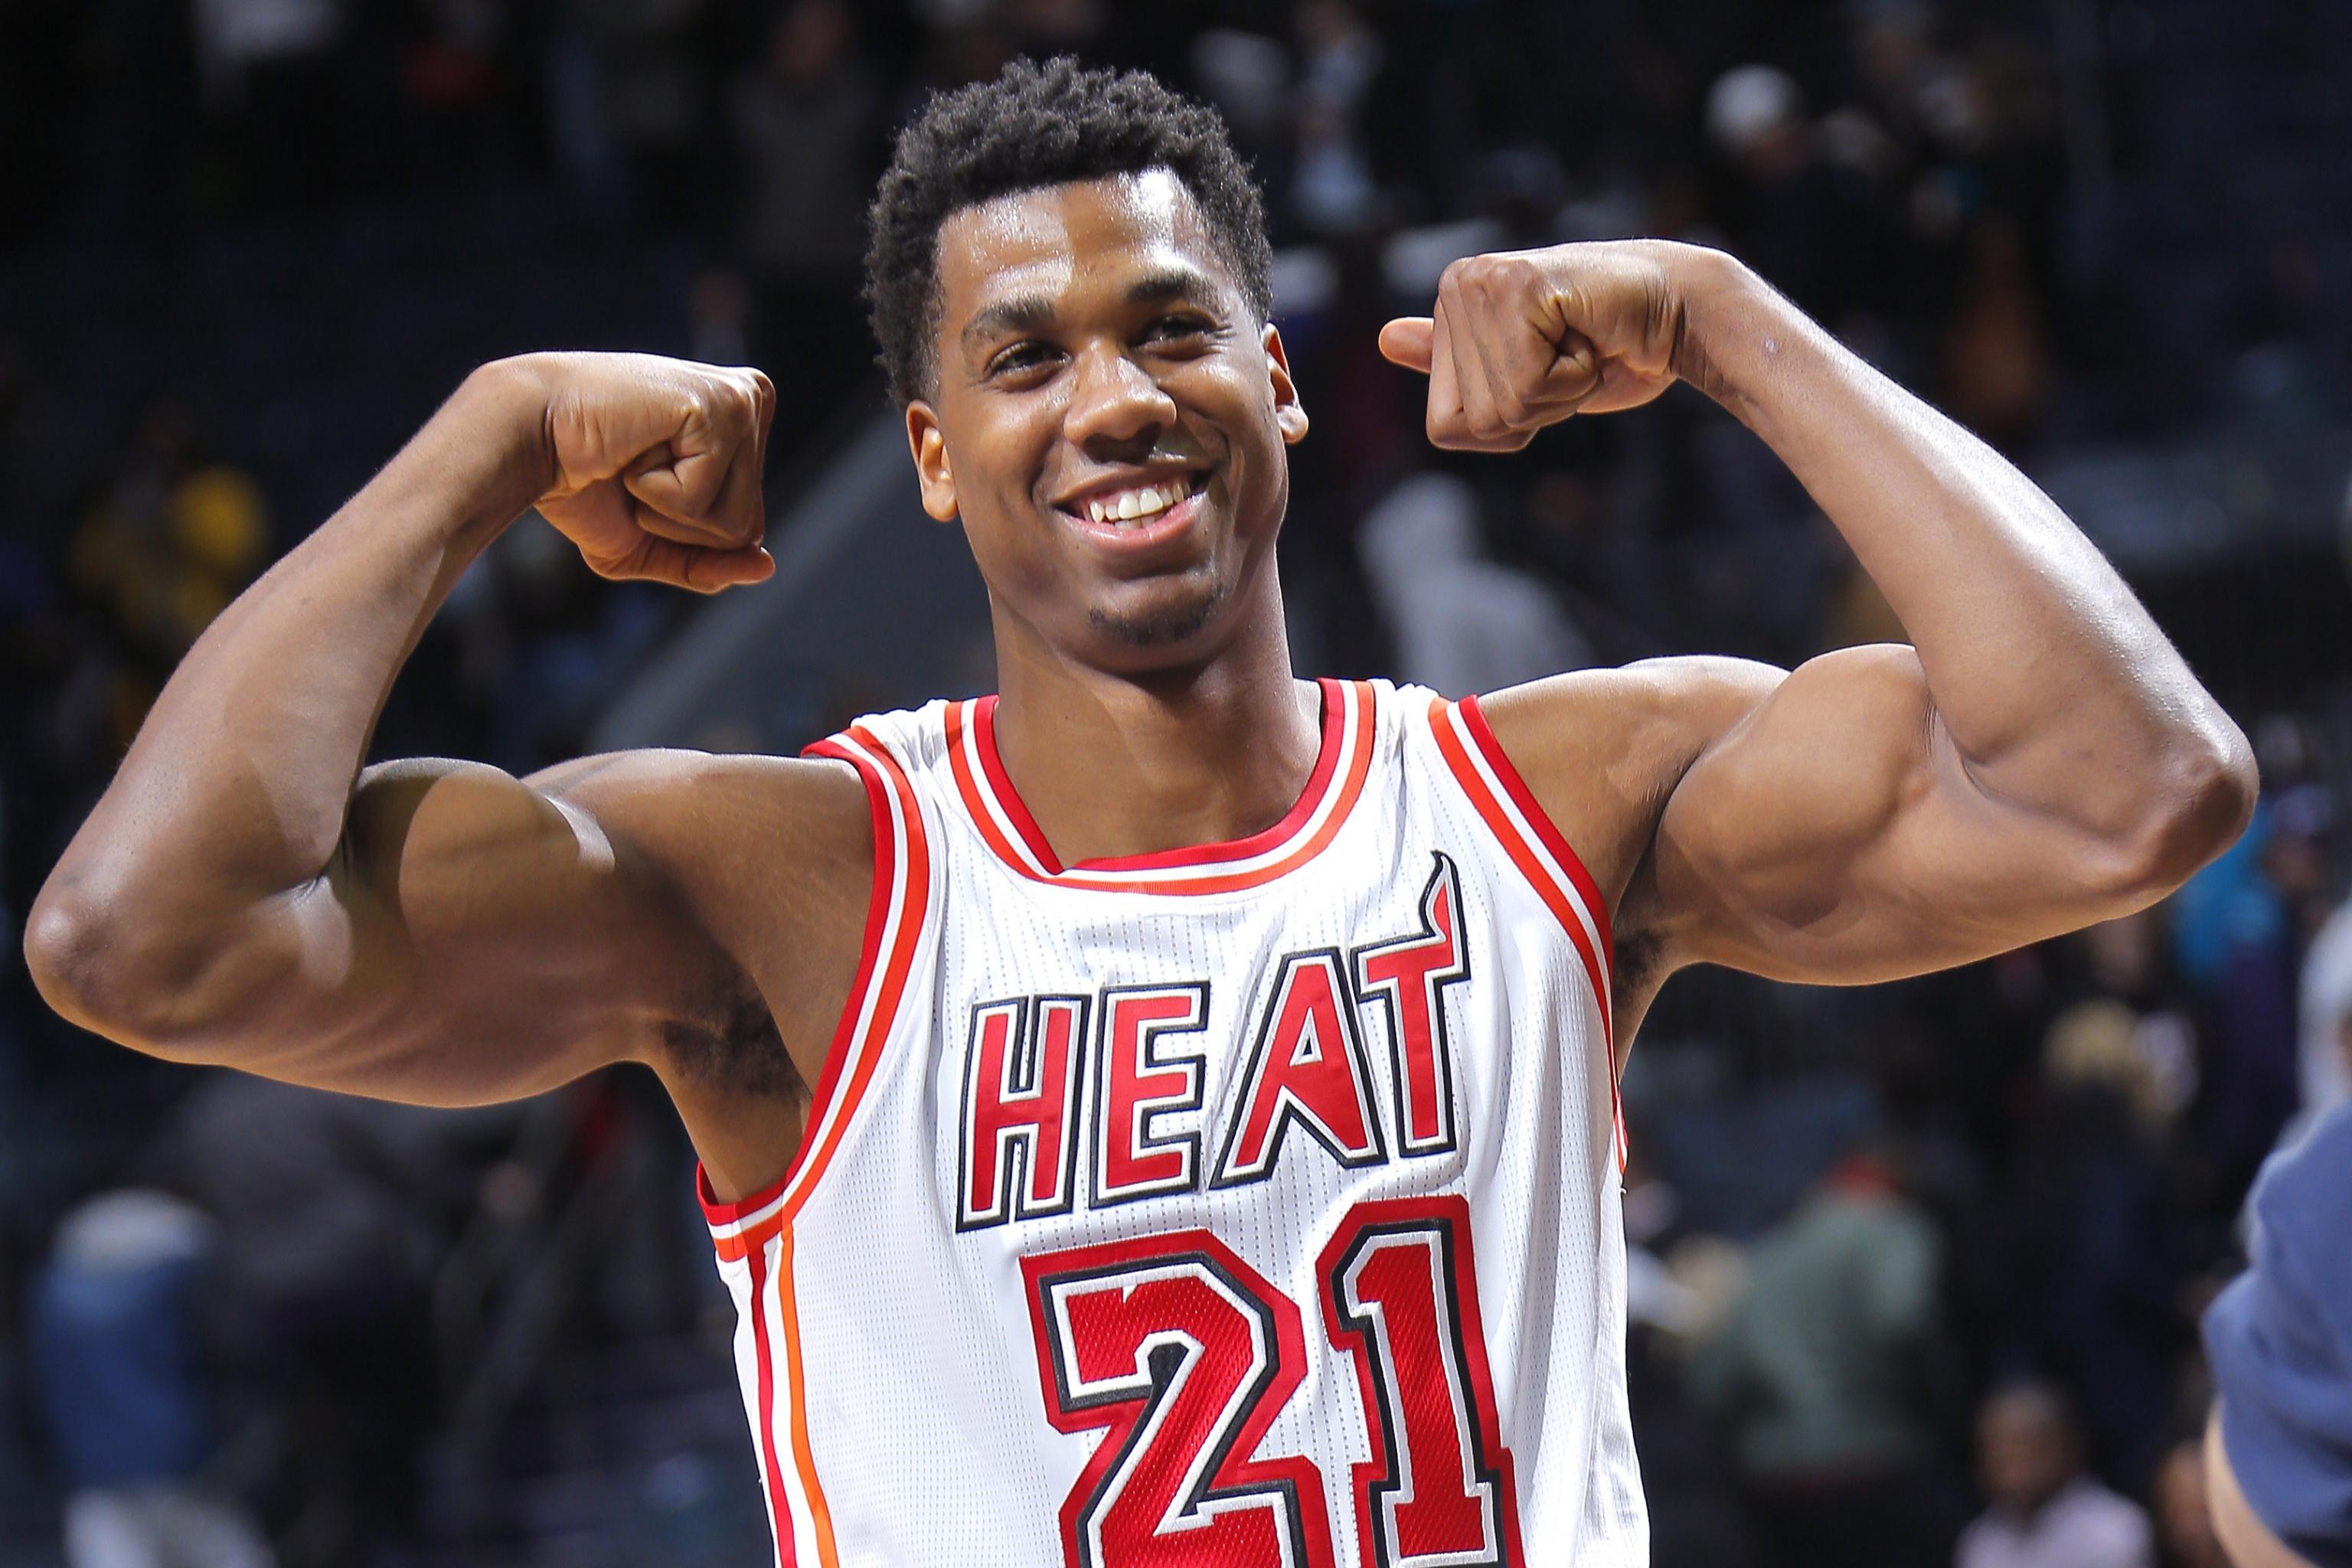 Hassan Whiteside must rise up to help save Heat and his own future